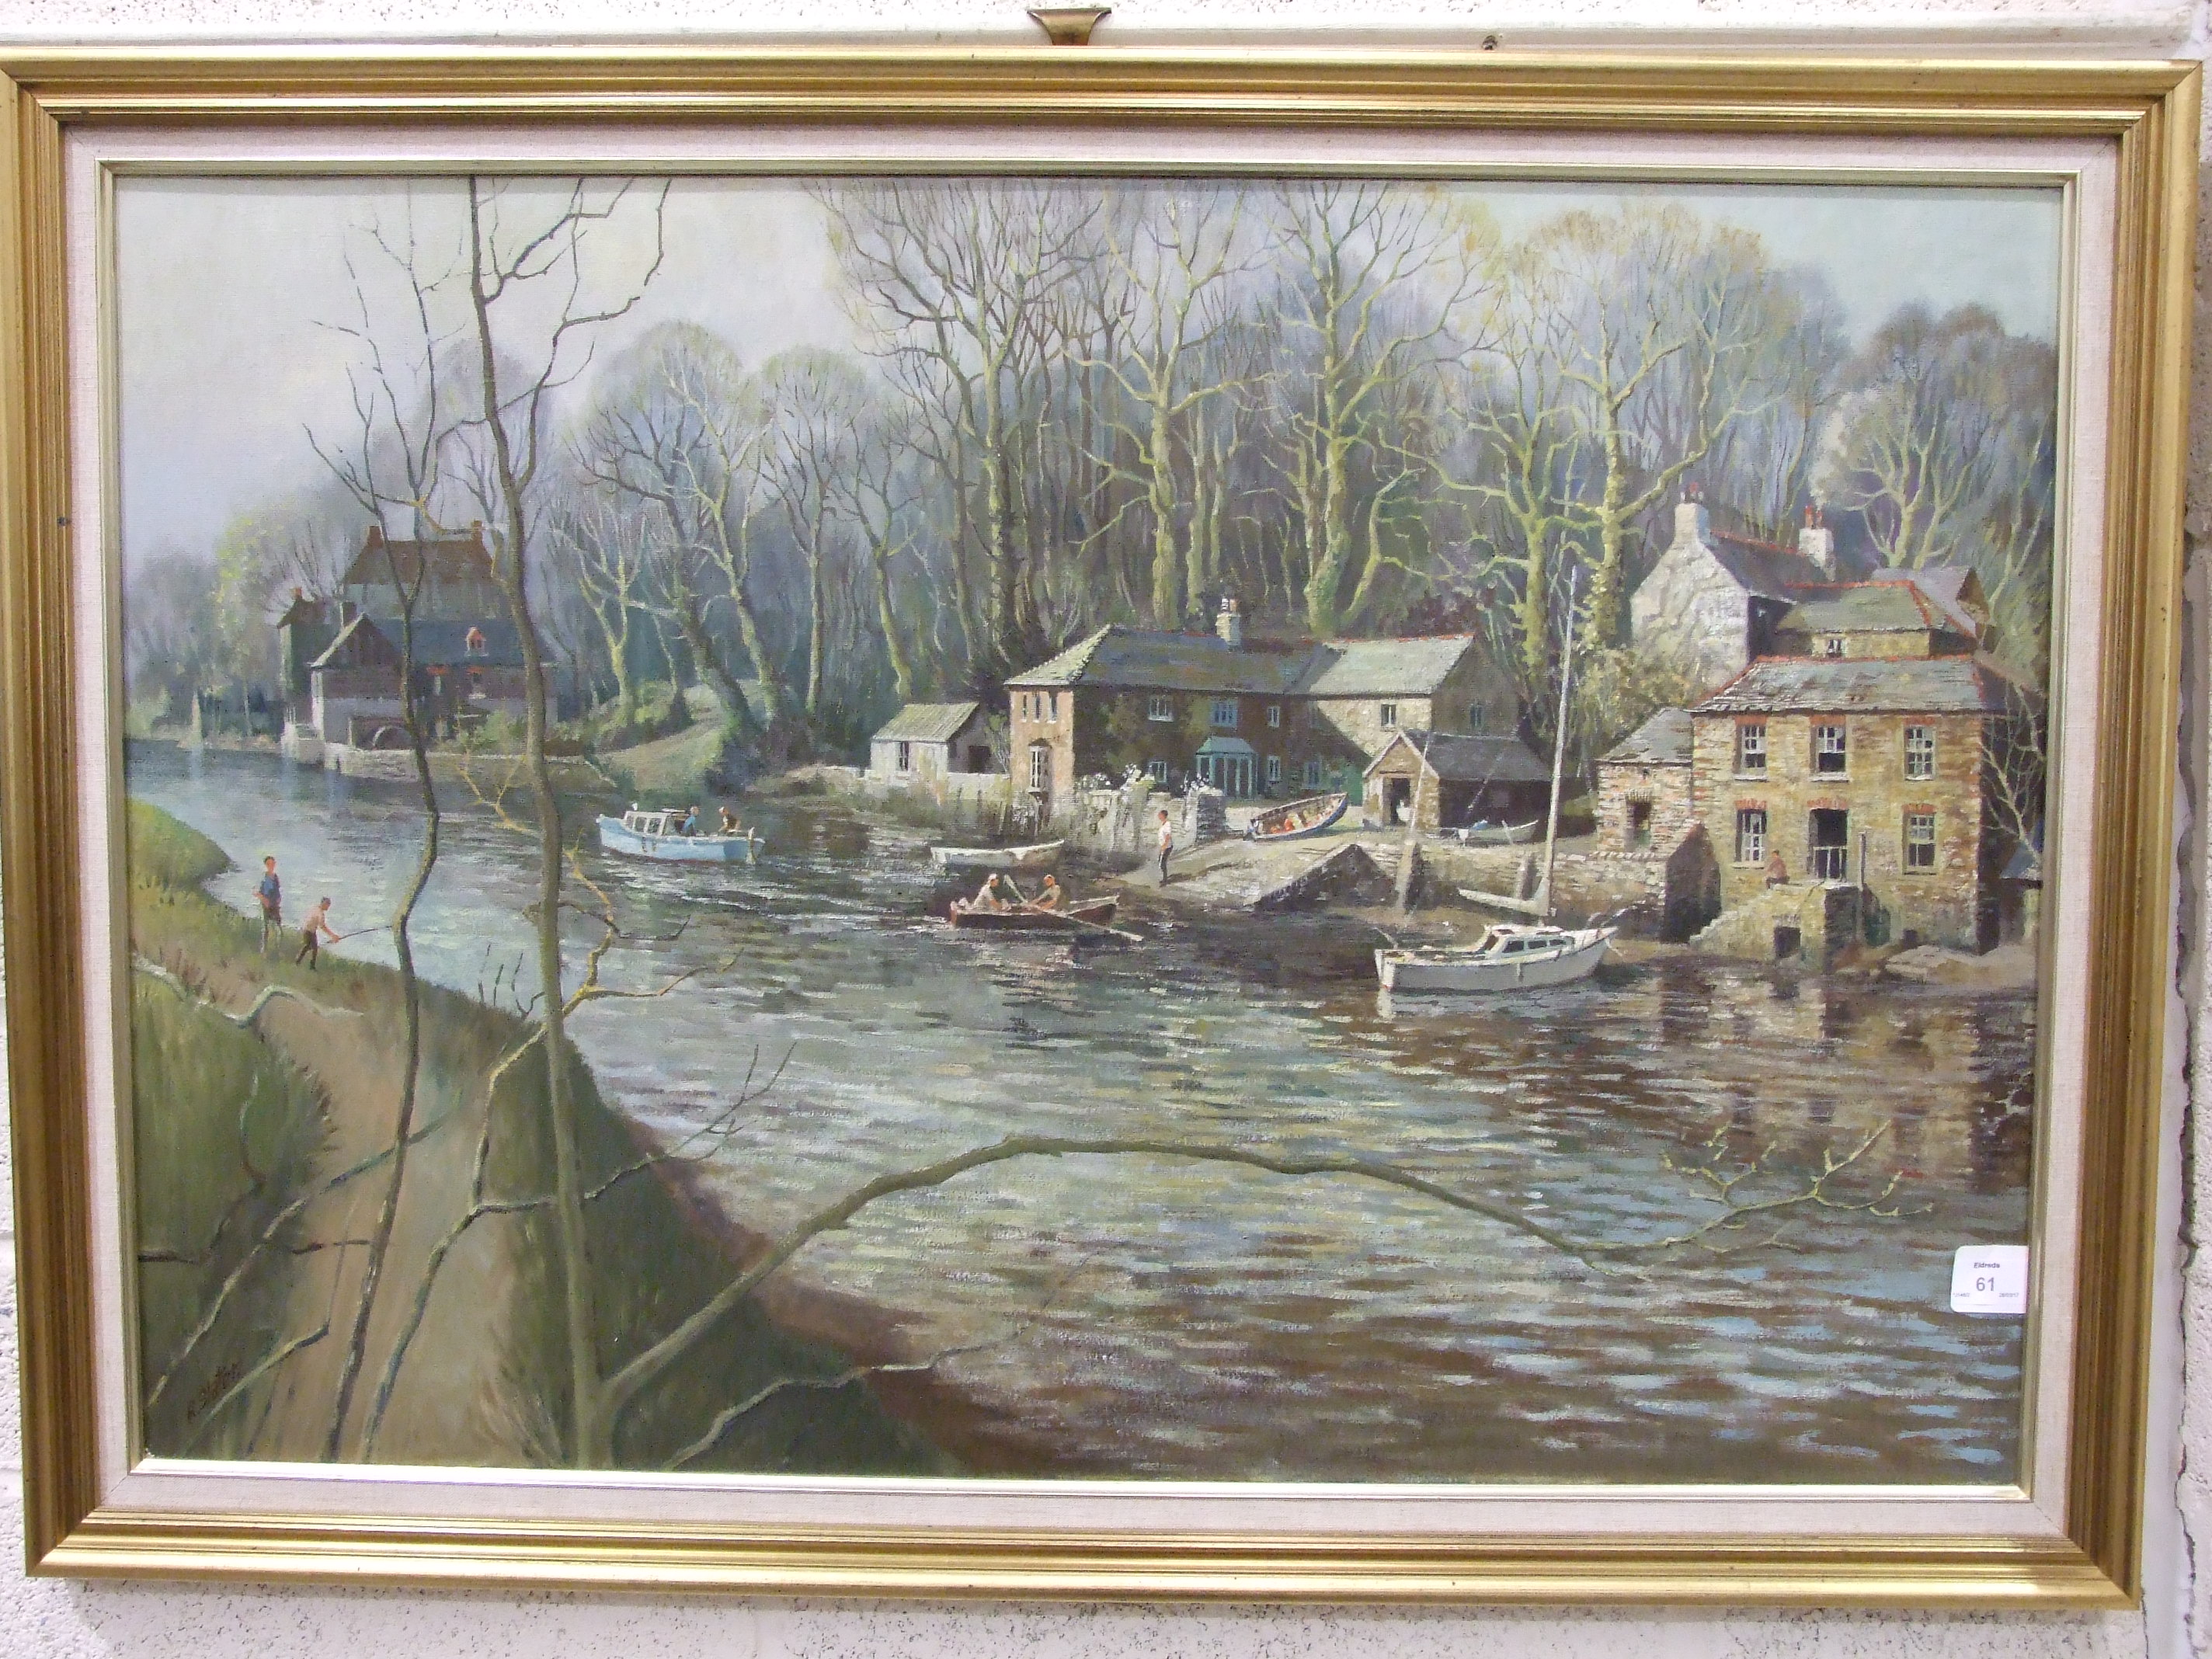 •R Slater, 'River scene with boats, boat shed and other buildings', signed oil on canvas, 60 x